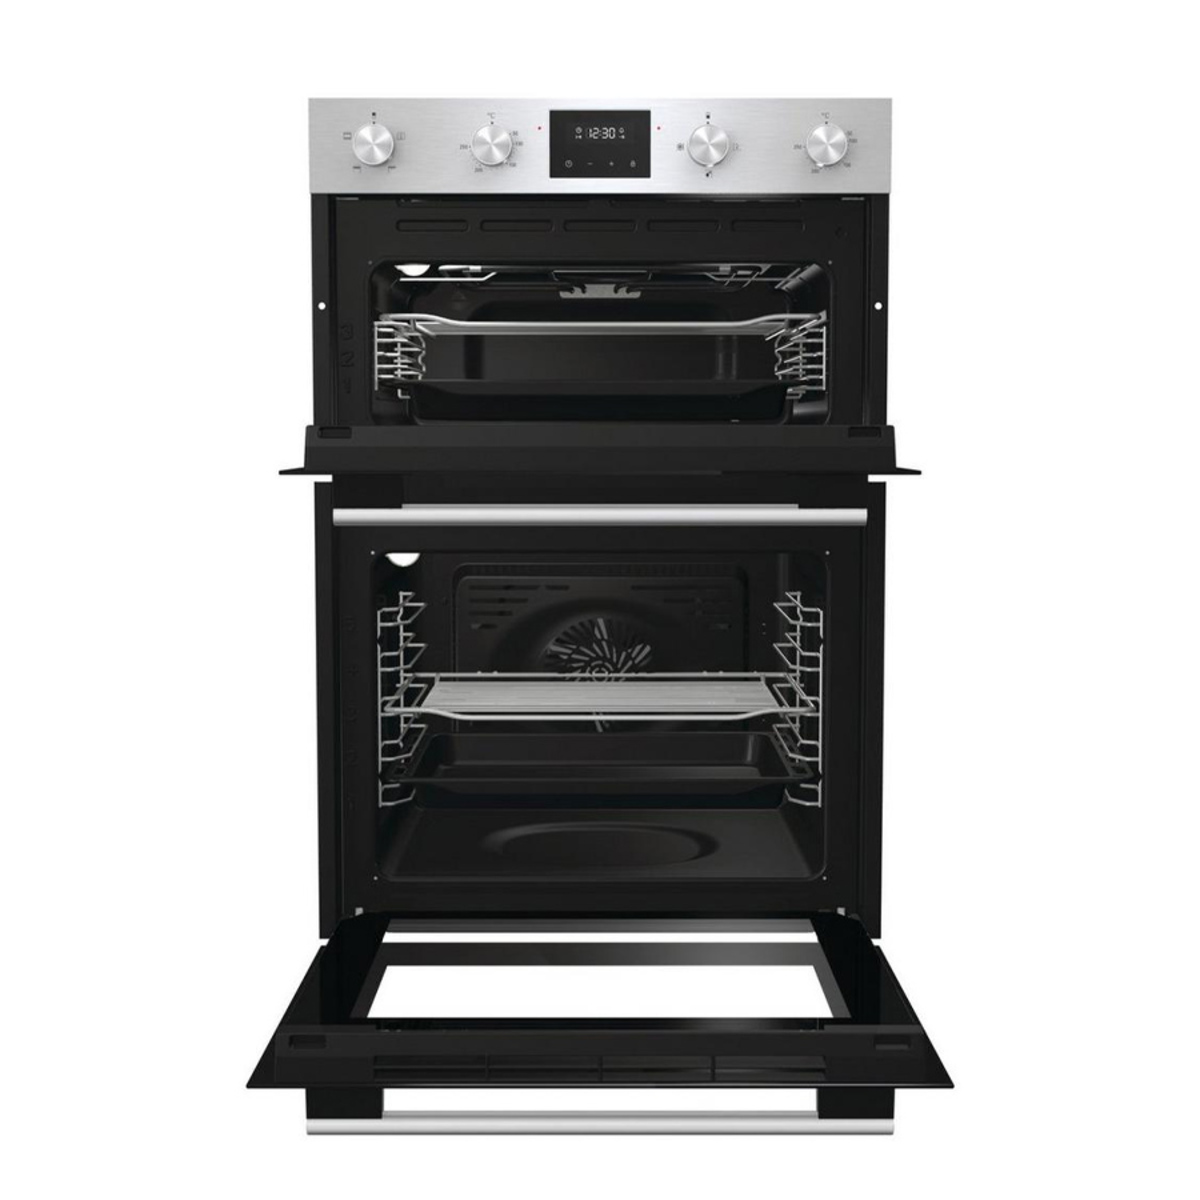 Hisense BID95211XUK A Rated 110 Litre 60cm Built-in Double Electric Oven